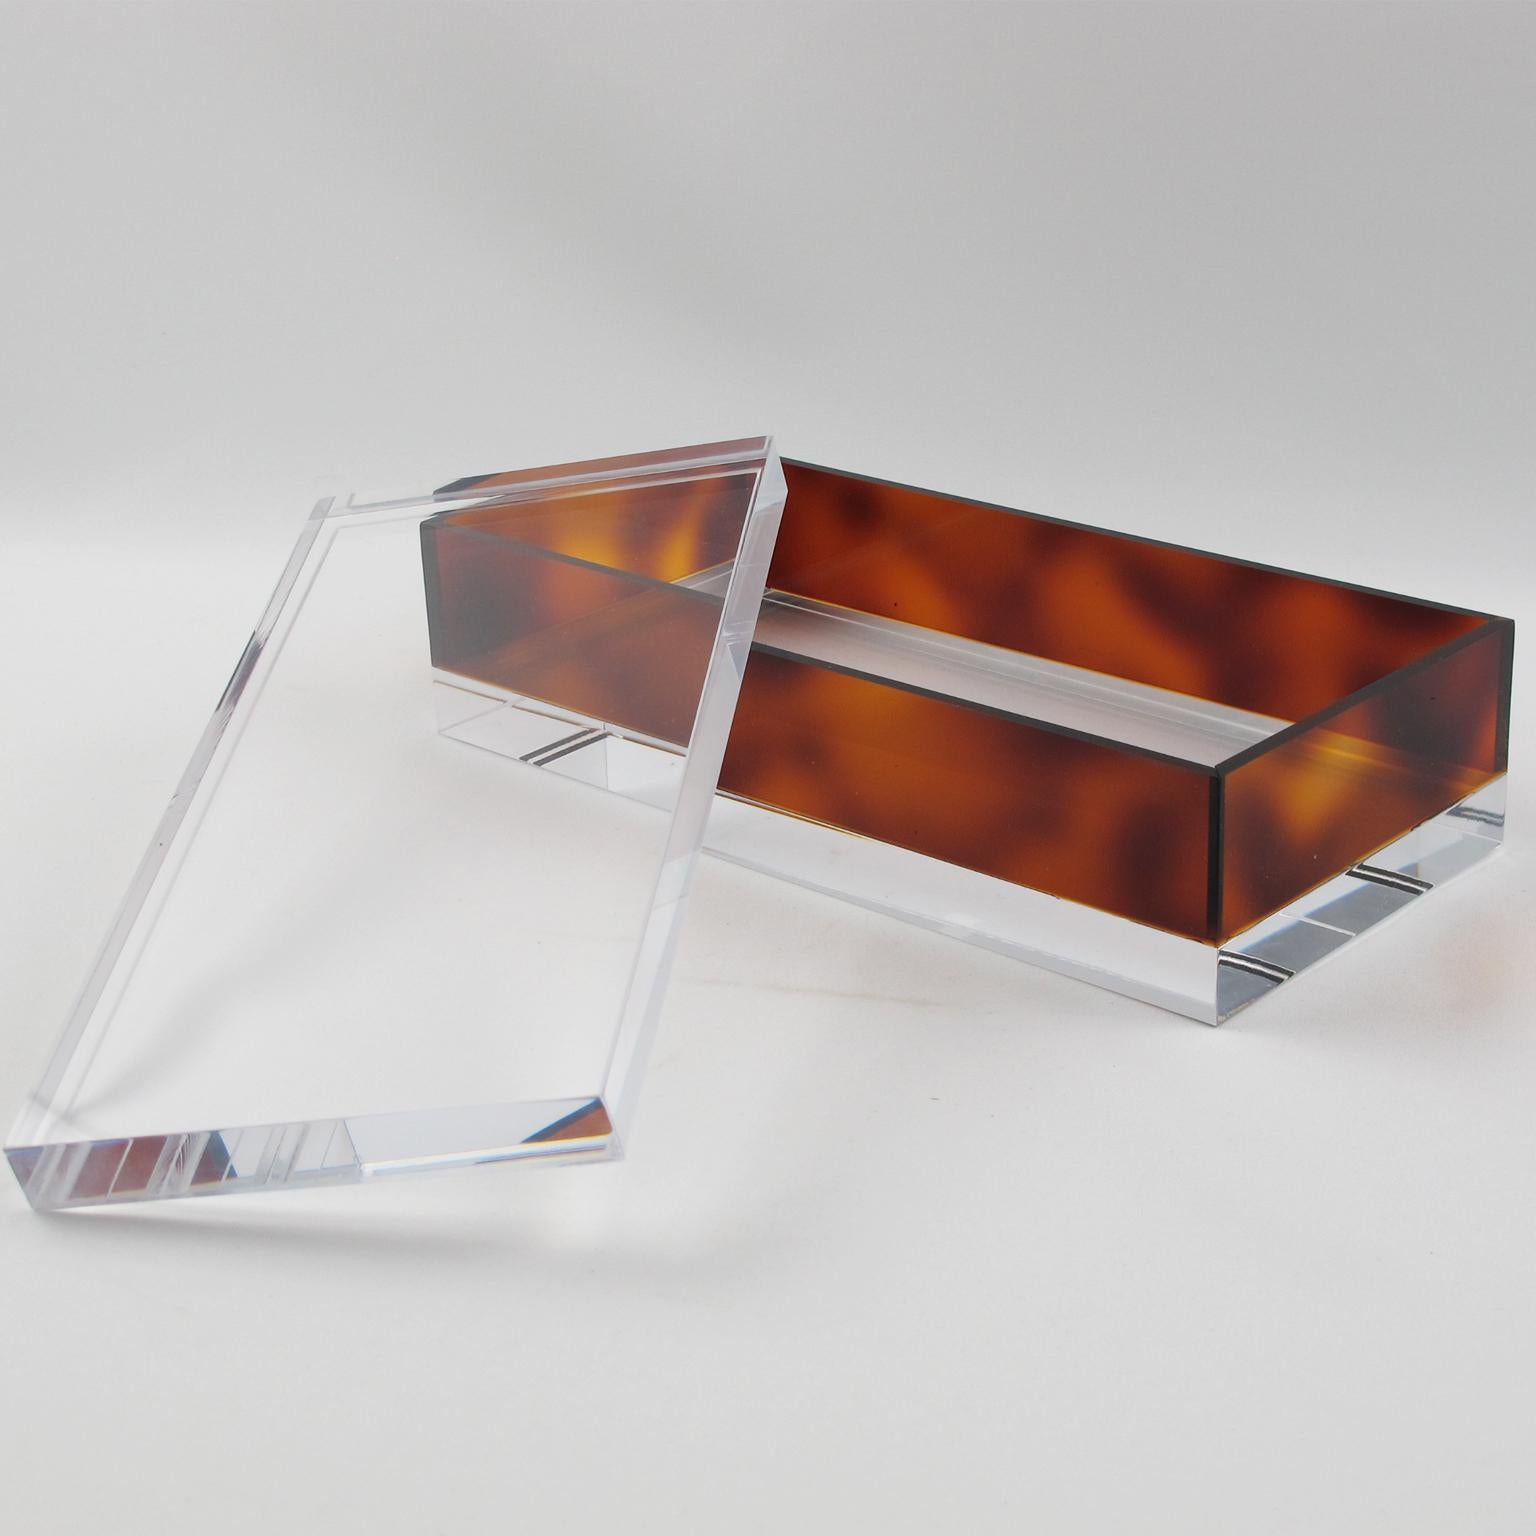 Stylish French 1970s modernist lidded box. Crystal clear and faux tortoiseshell (tortoise) color Lucite or plexiglass, long geometric rectangular shape. No visible maker's mark.
Measurements: 9.07 in. wide (23 cm) x 4.50 in. deep (11.5 cm) x 2.75